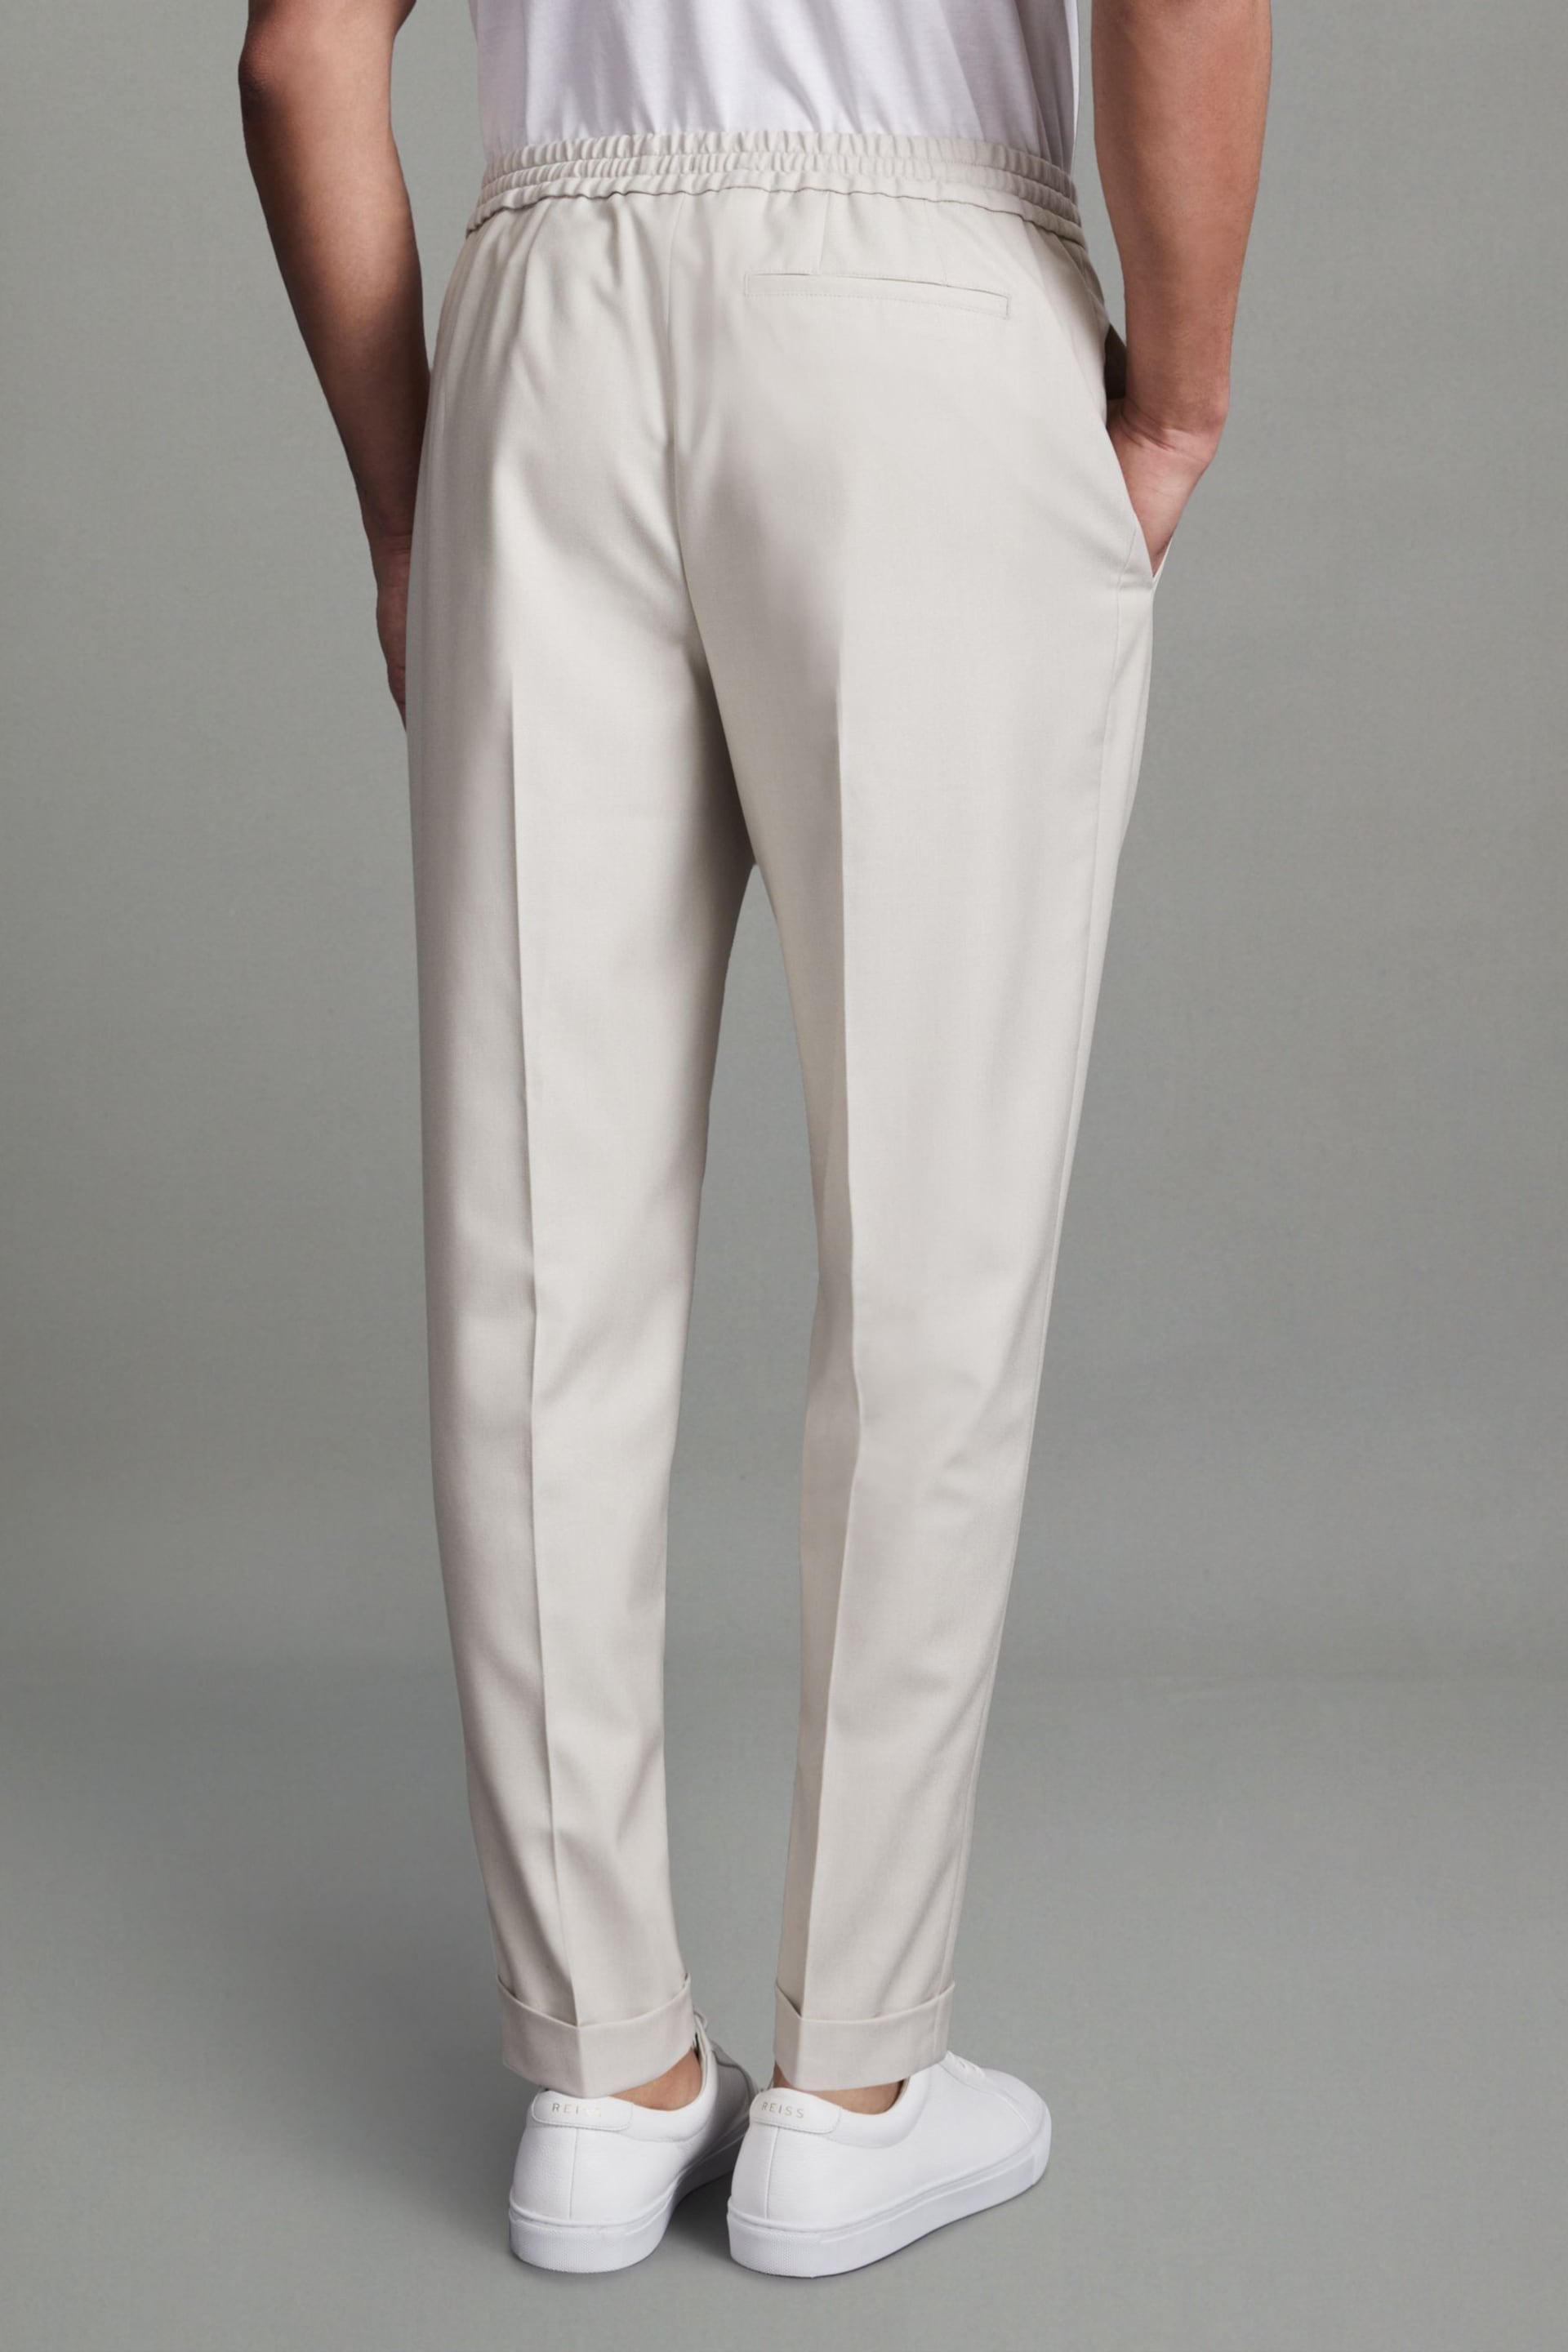 Reiss Stone Brighton Relaxed Drawstring Trousers with Turn-Ups - Image 5 of 5